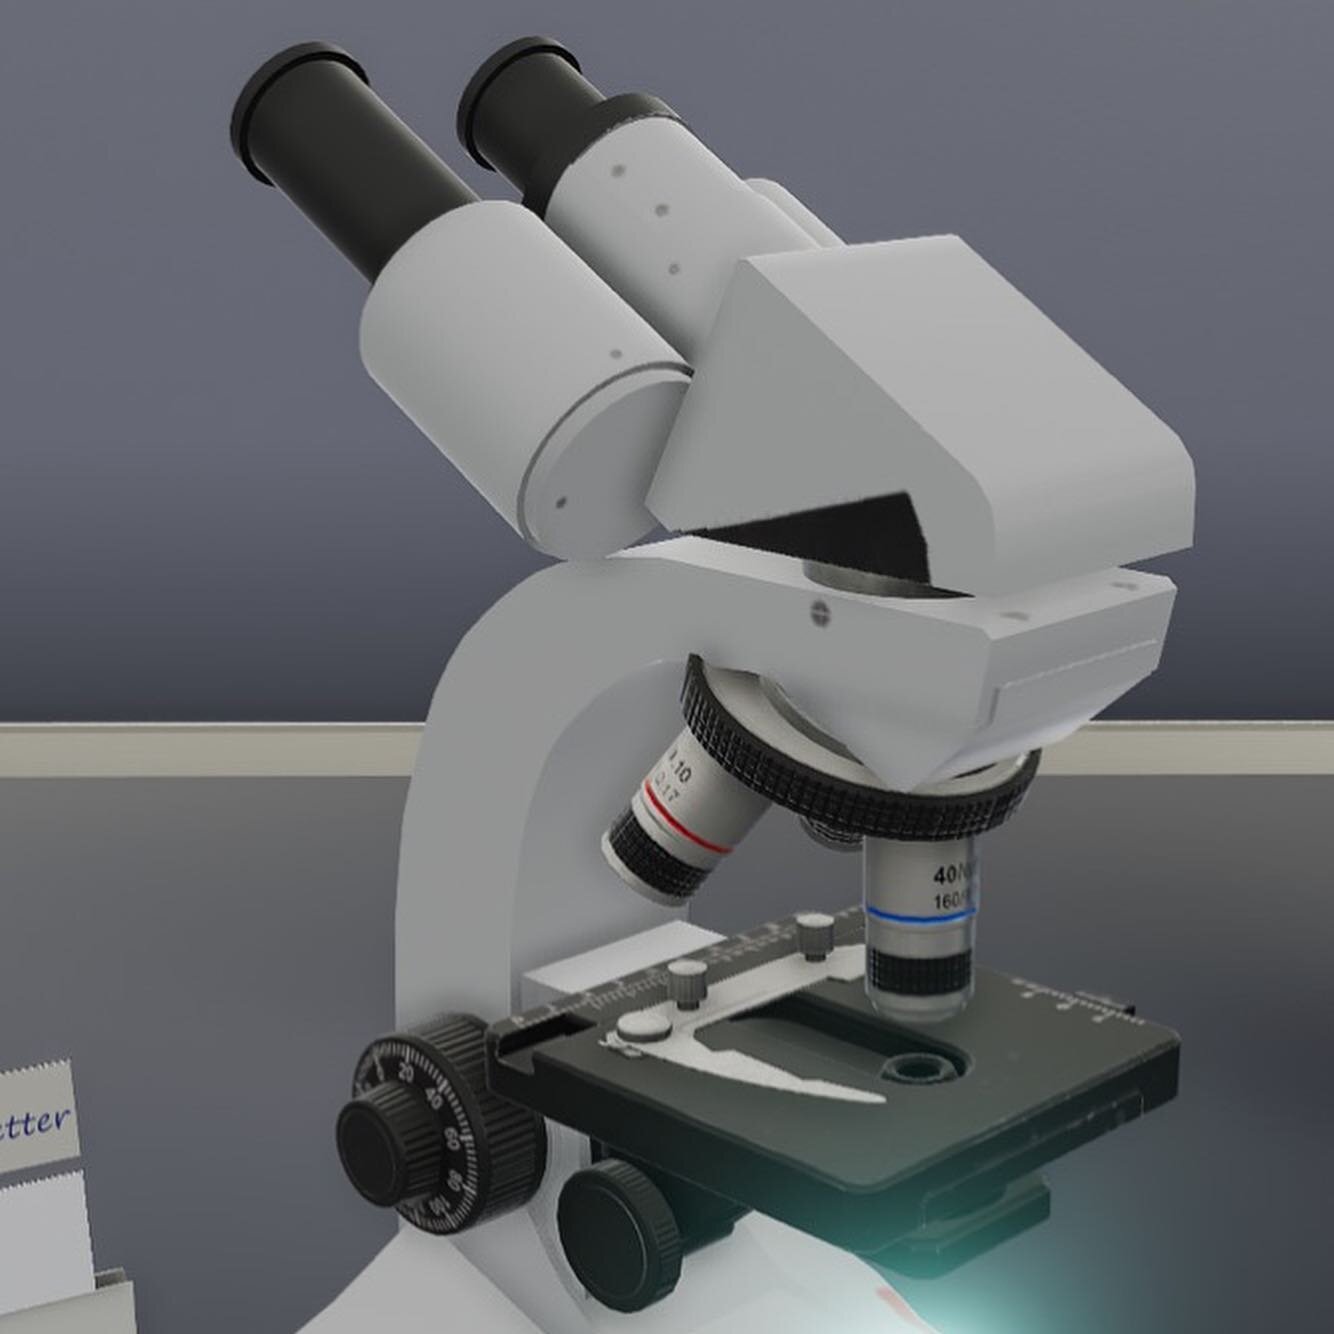 What are the benefits of virtual microscope simulations? We share what we've learned over seven years building microscopes for #virtuallearning environments over on our blog: CNDG.info/blog #STEM #distancelearning #edtech